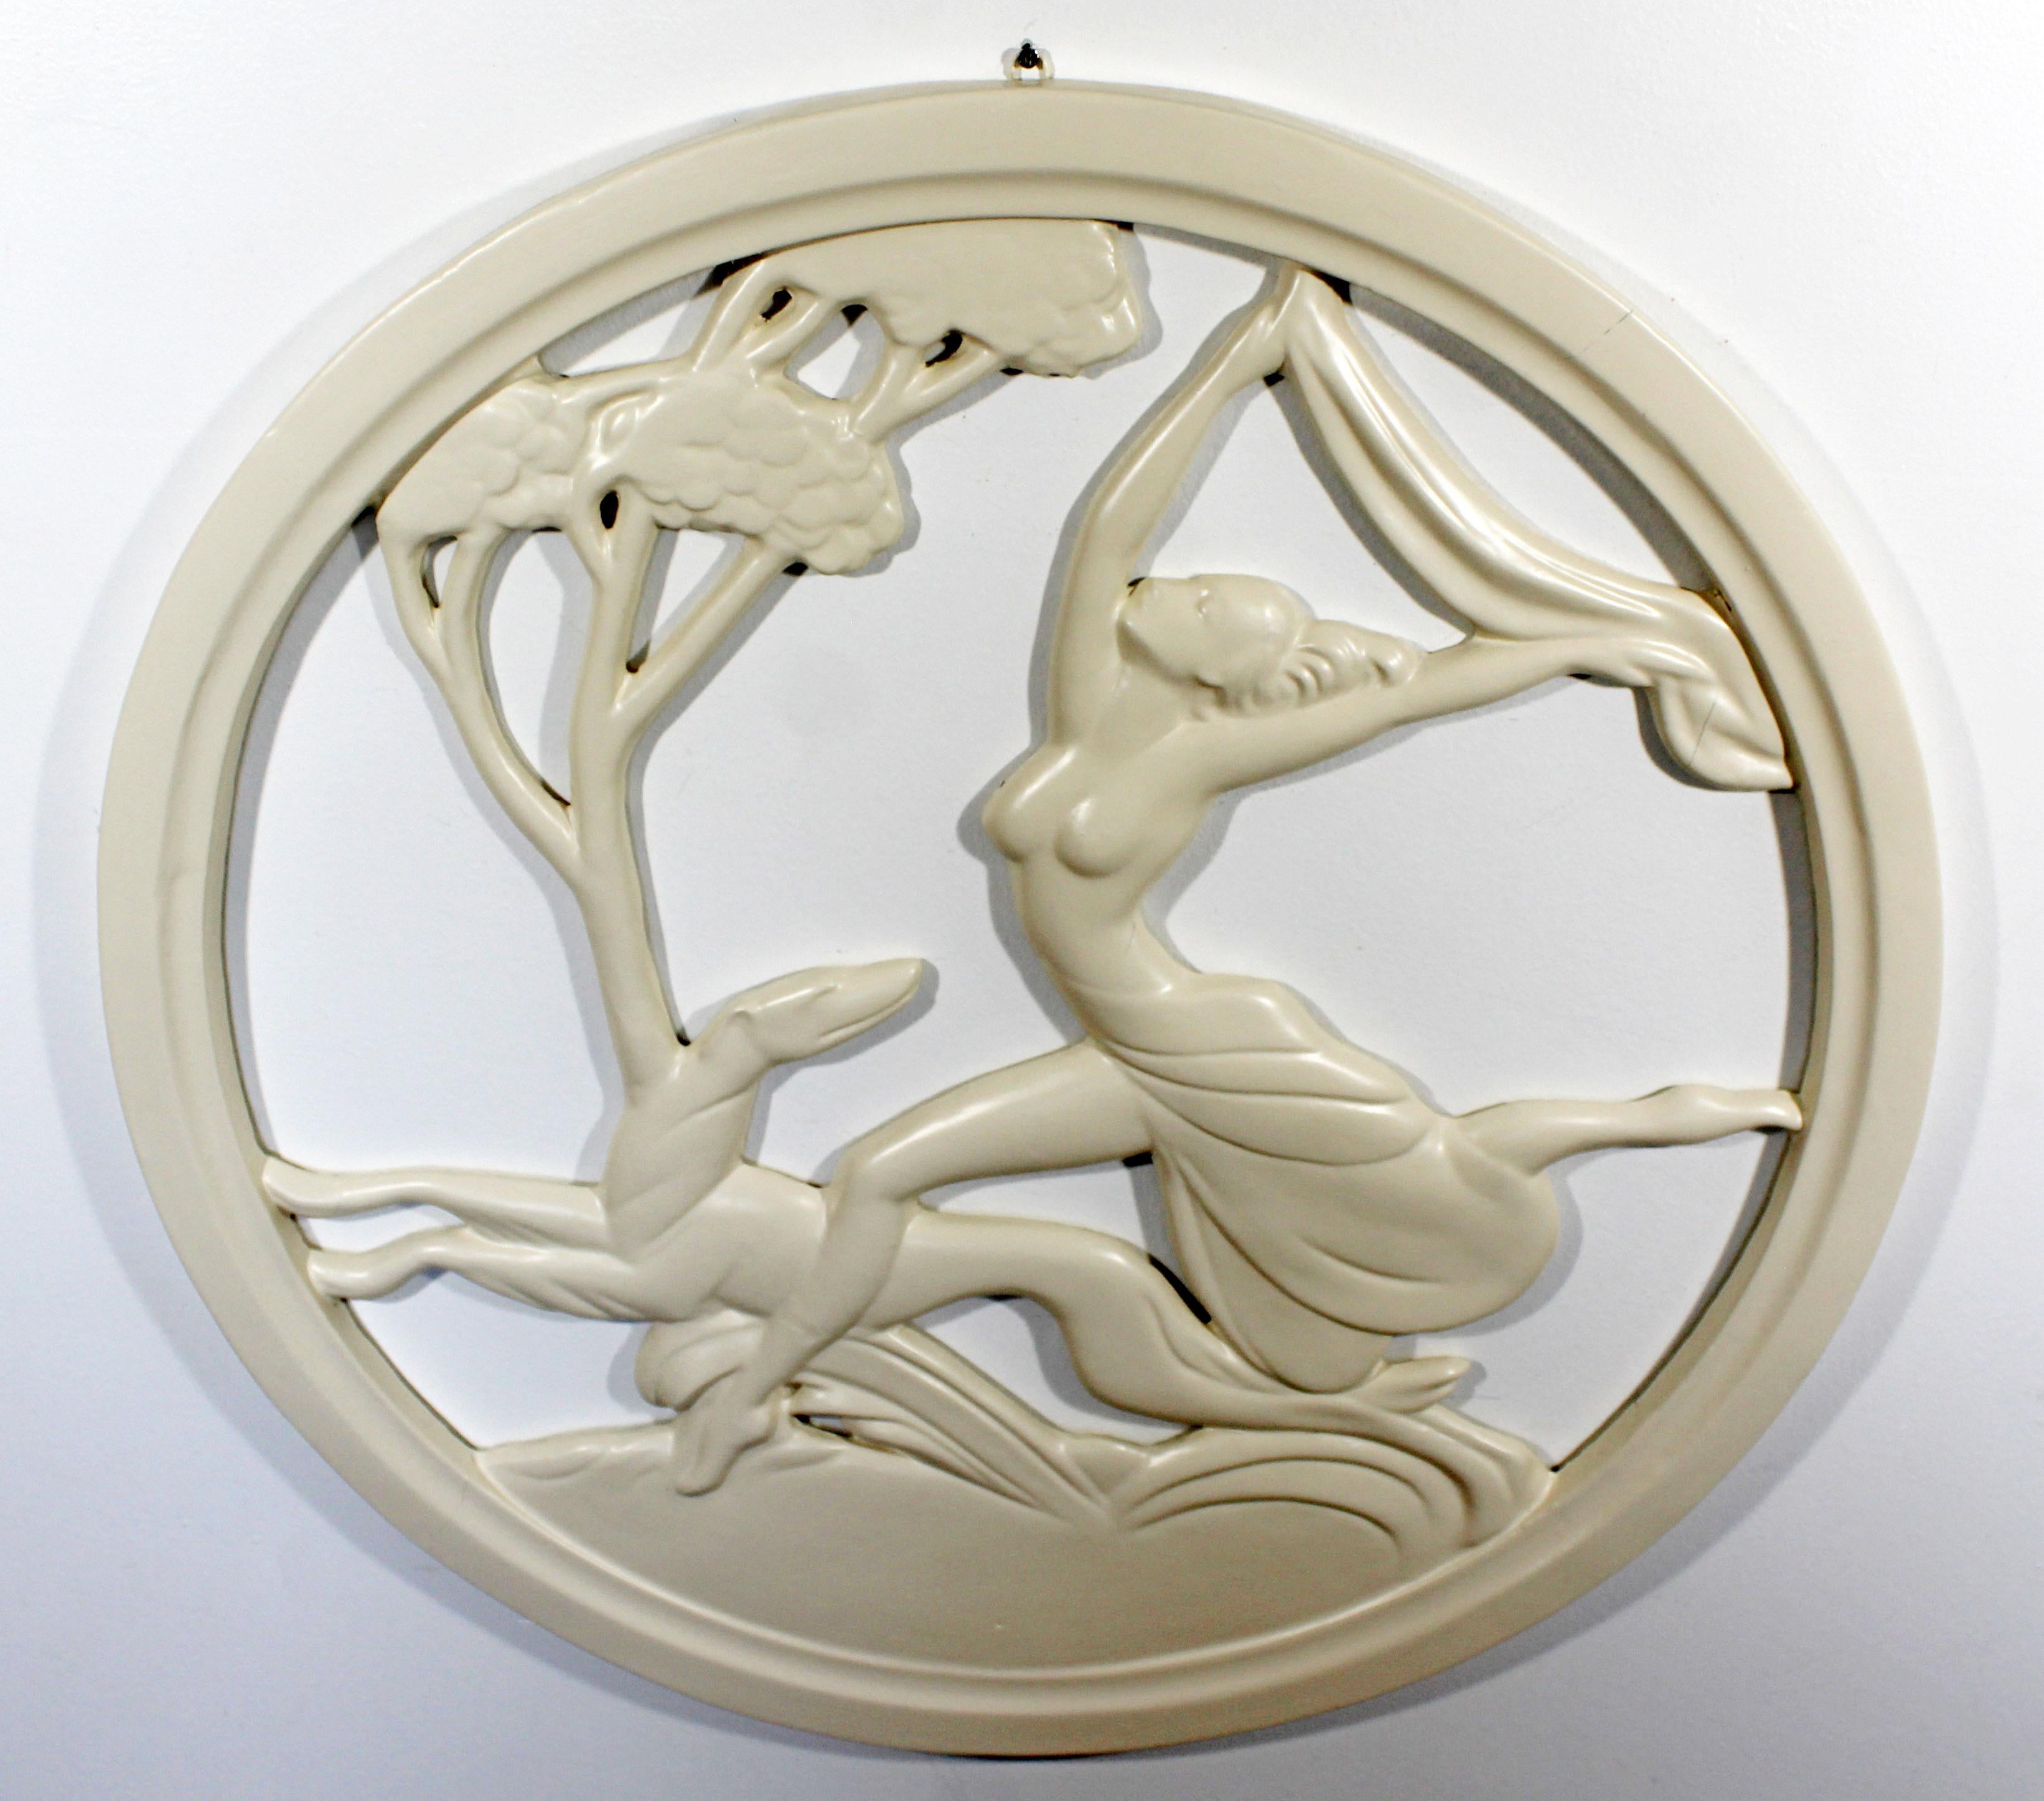 For your consideration is a lovely, circular wall sculpture, depicting a woman running with a greyhound. In good antique condition. The dimensions are 25